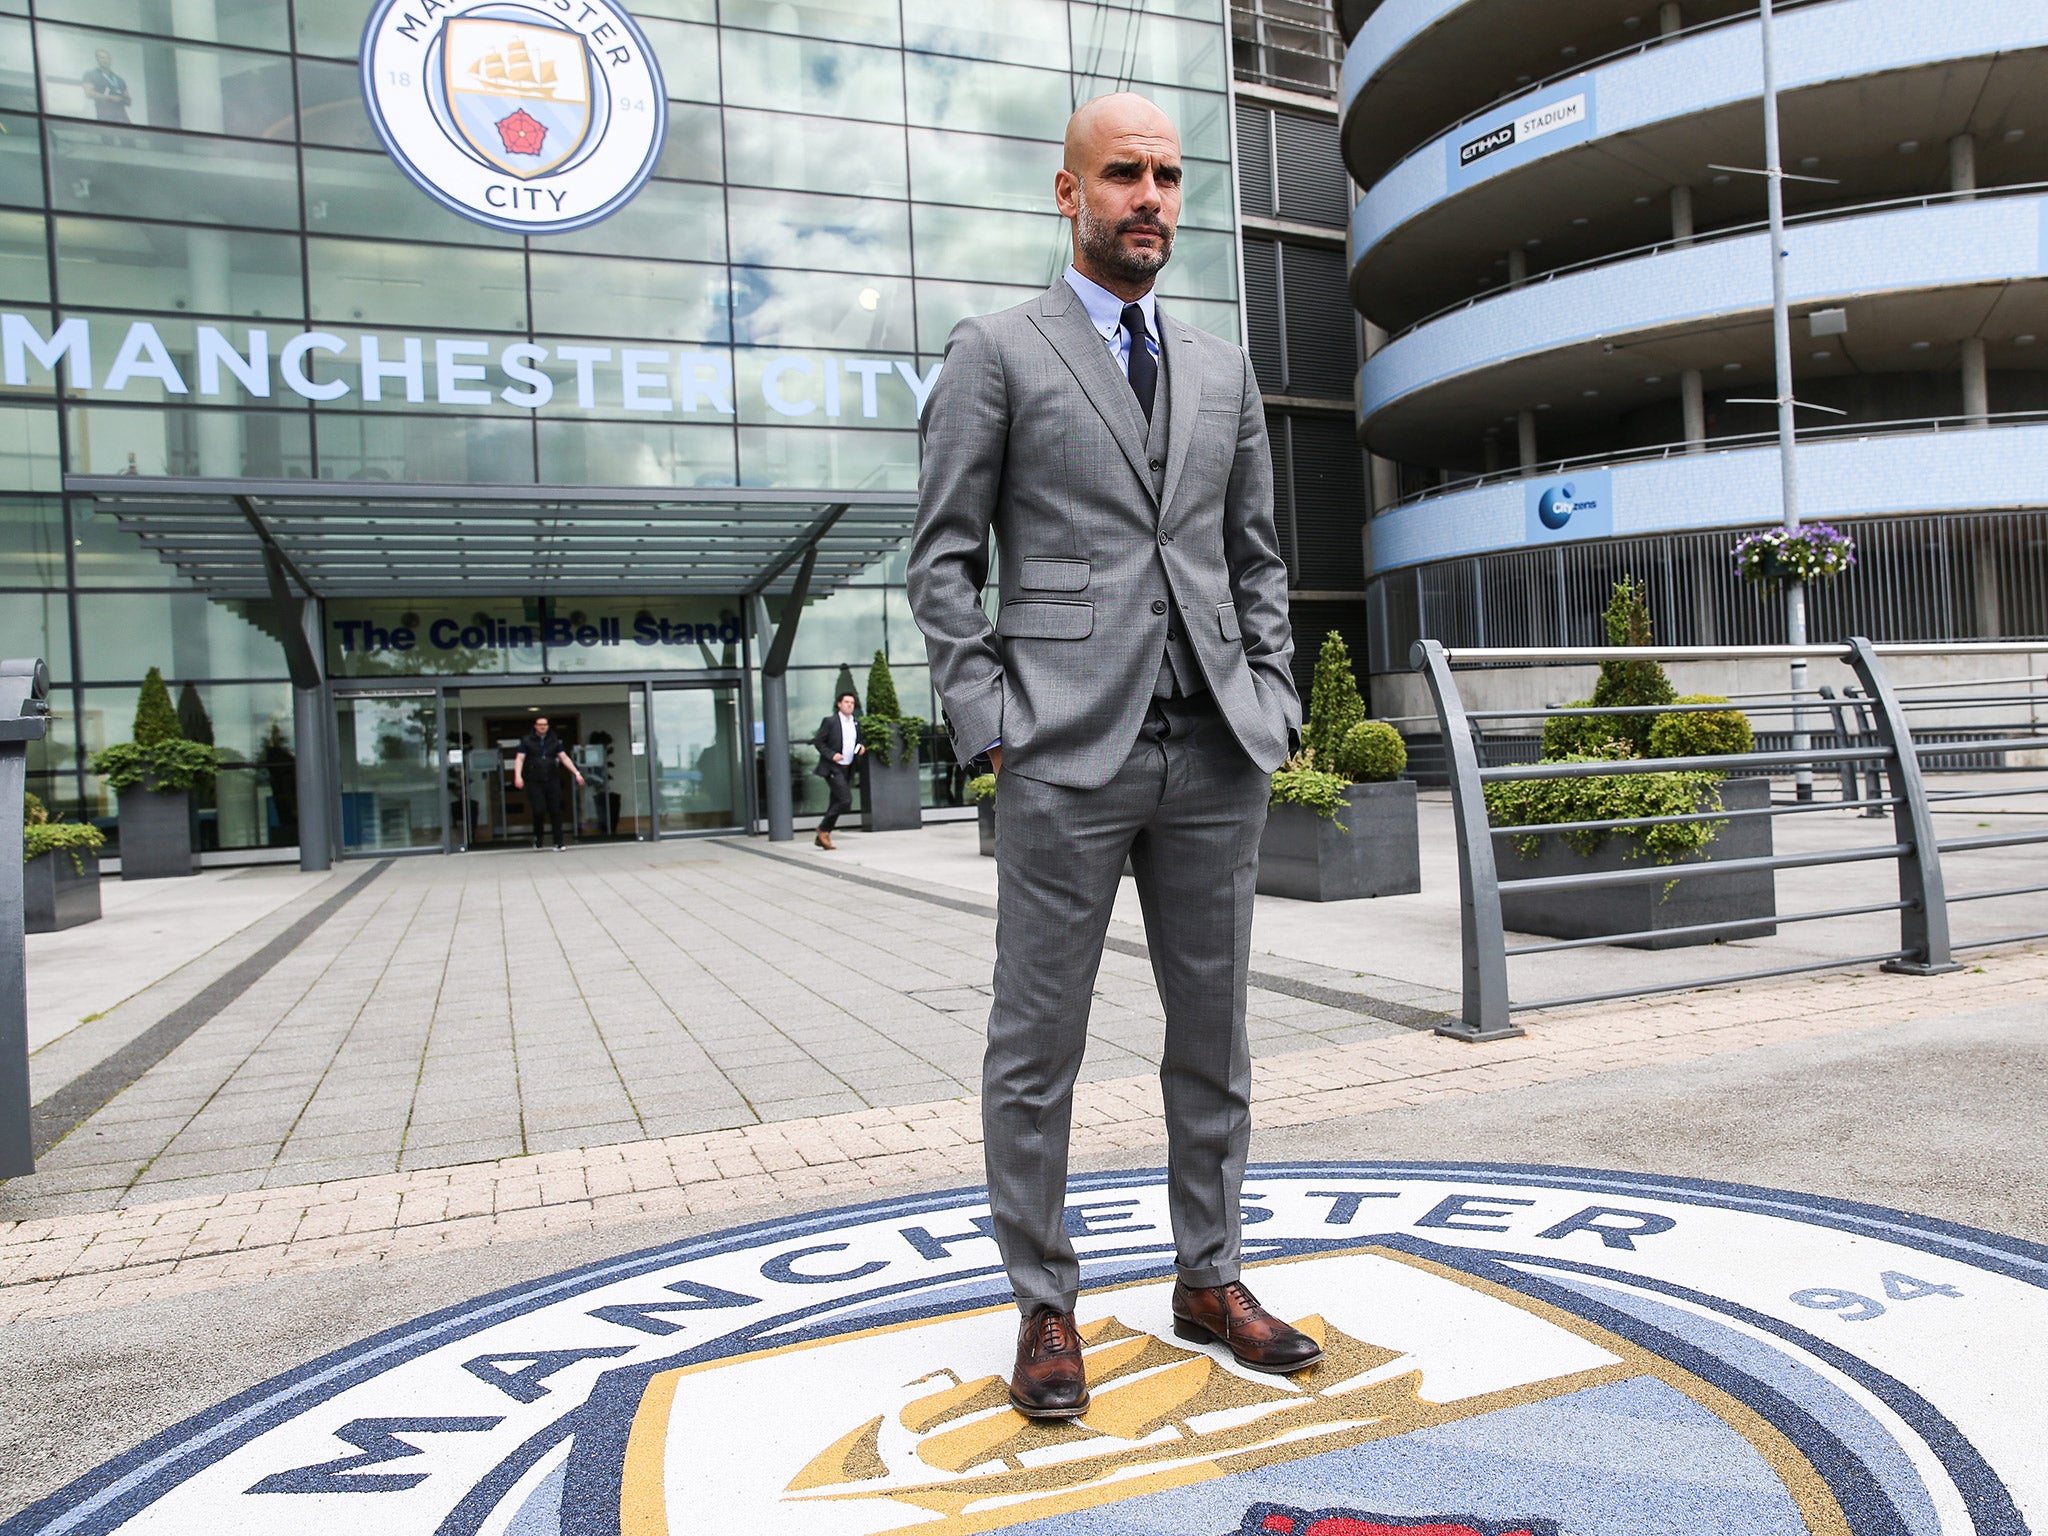 Pep Guardiola takes charge of his first match as Manchester City manager against Bayern Munich